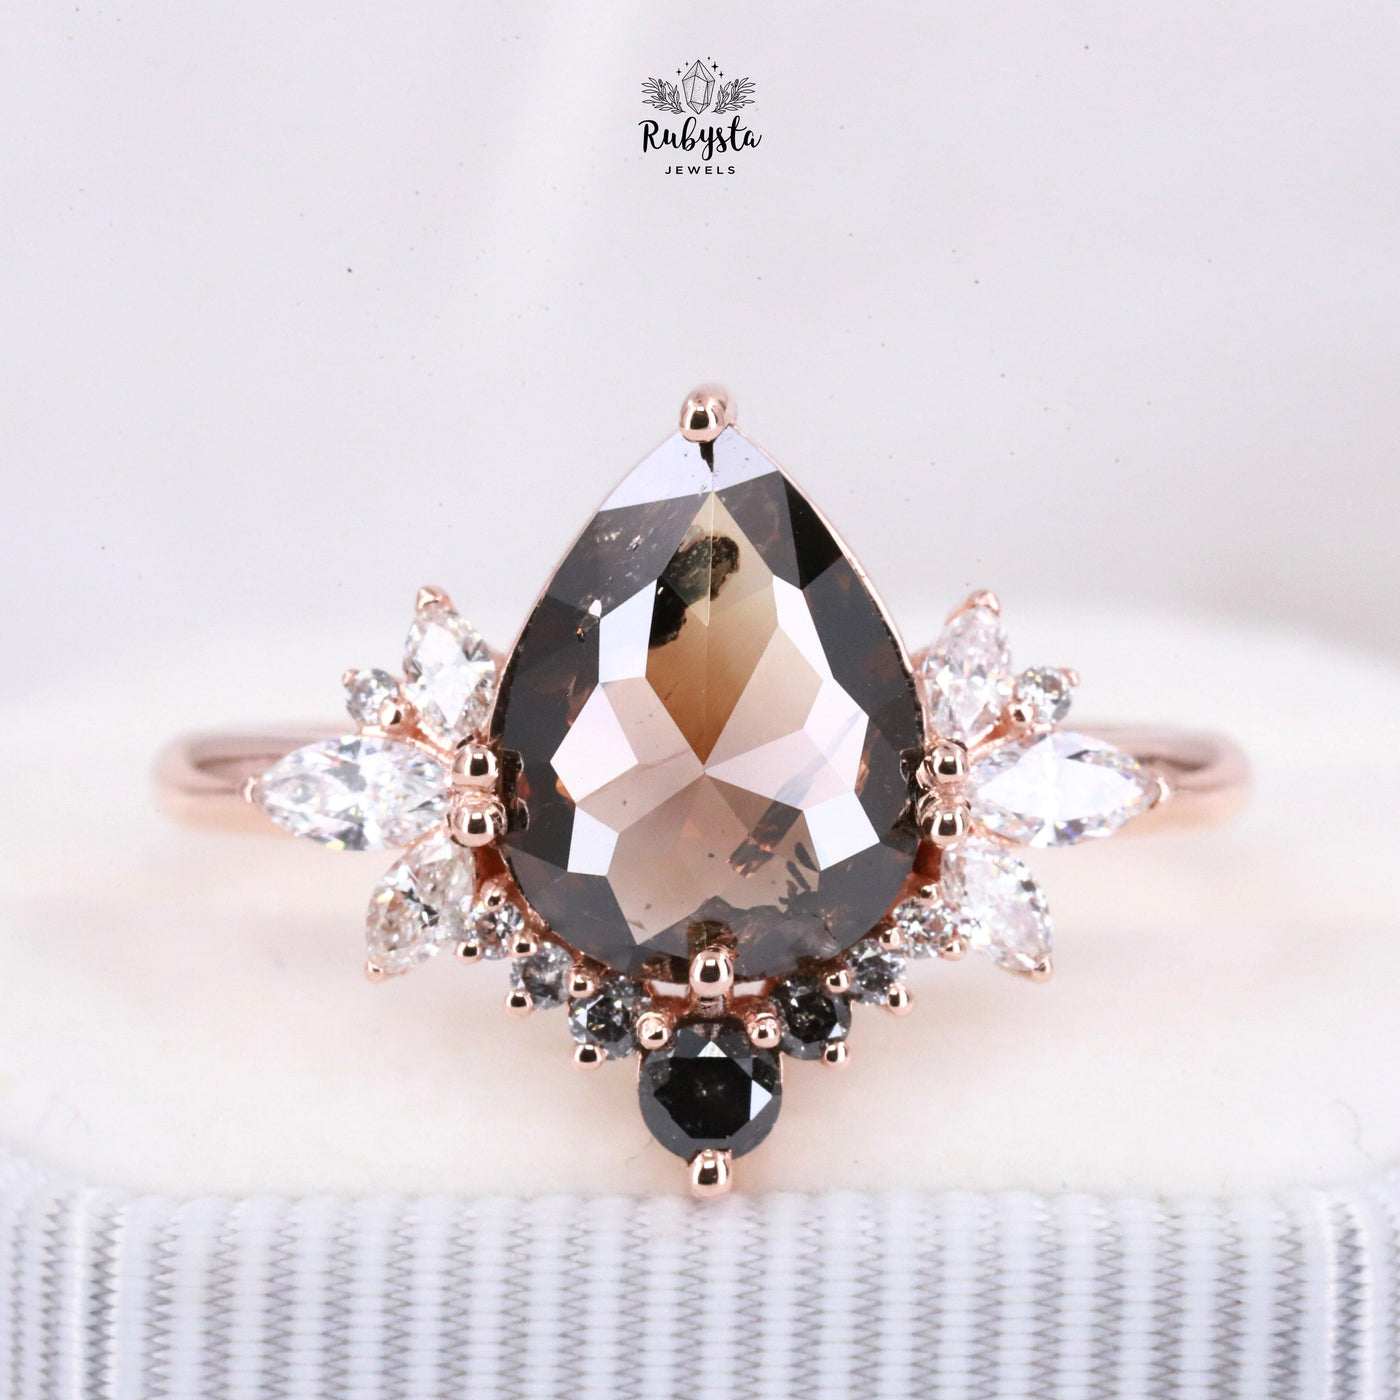 Pear Diamond Ring | Salt and pepper Ring | Pear Salt and pepper Ring | Fade Setting - Rubysta